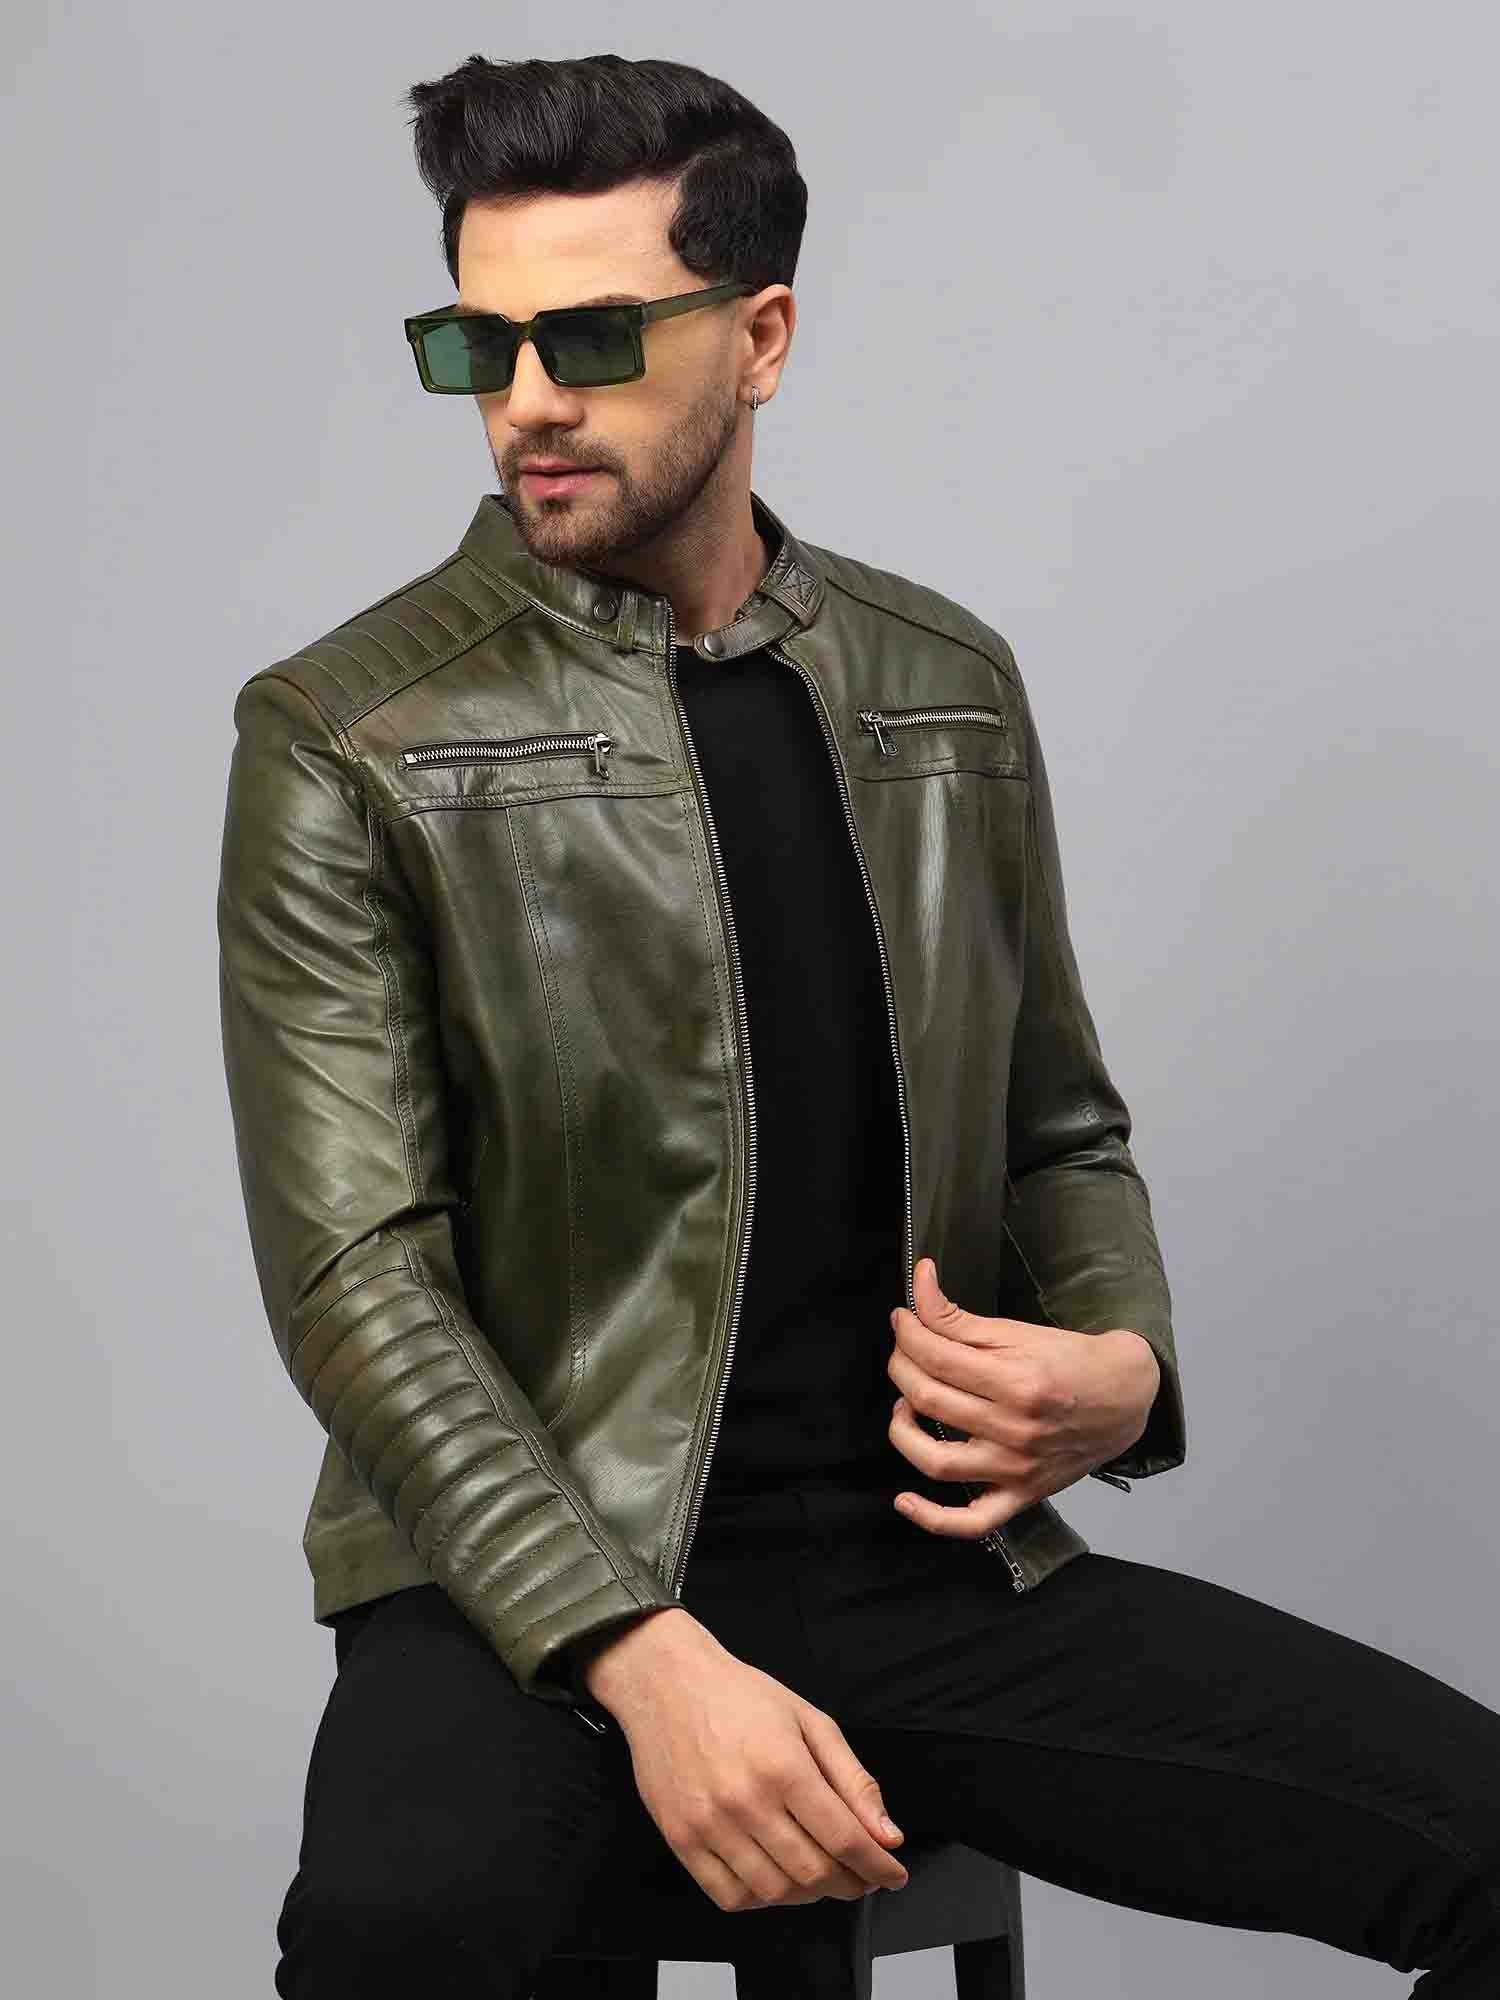 Men's Leather Jackets for sale in Bangalore, India | Facebook Marketplace |  Facebook